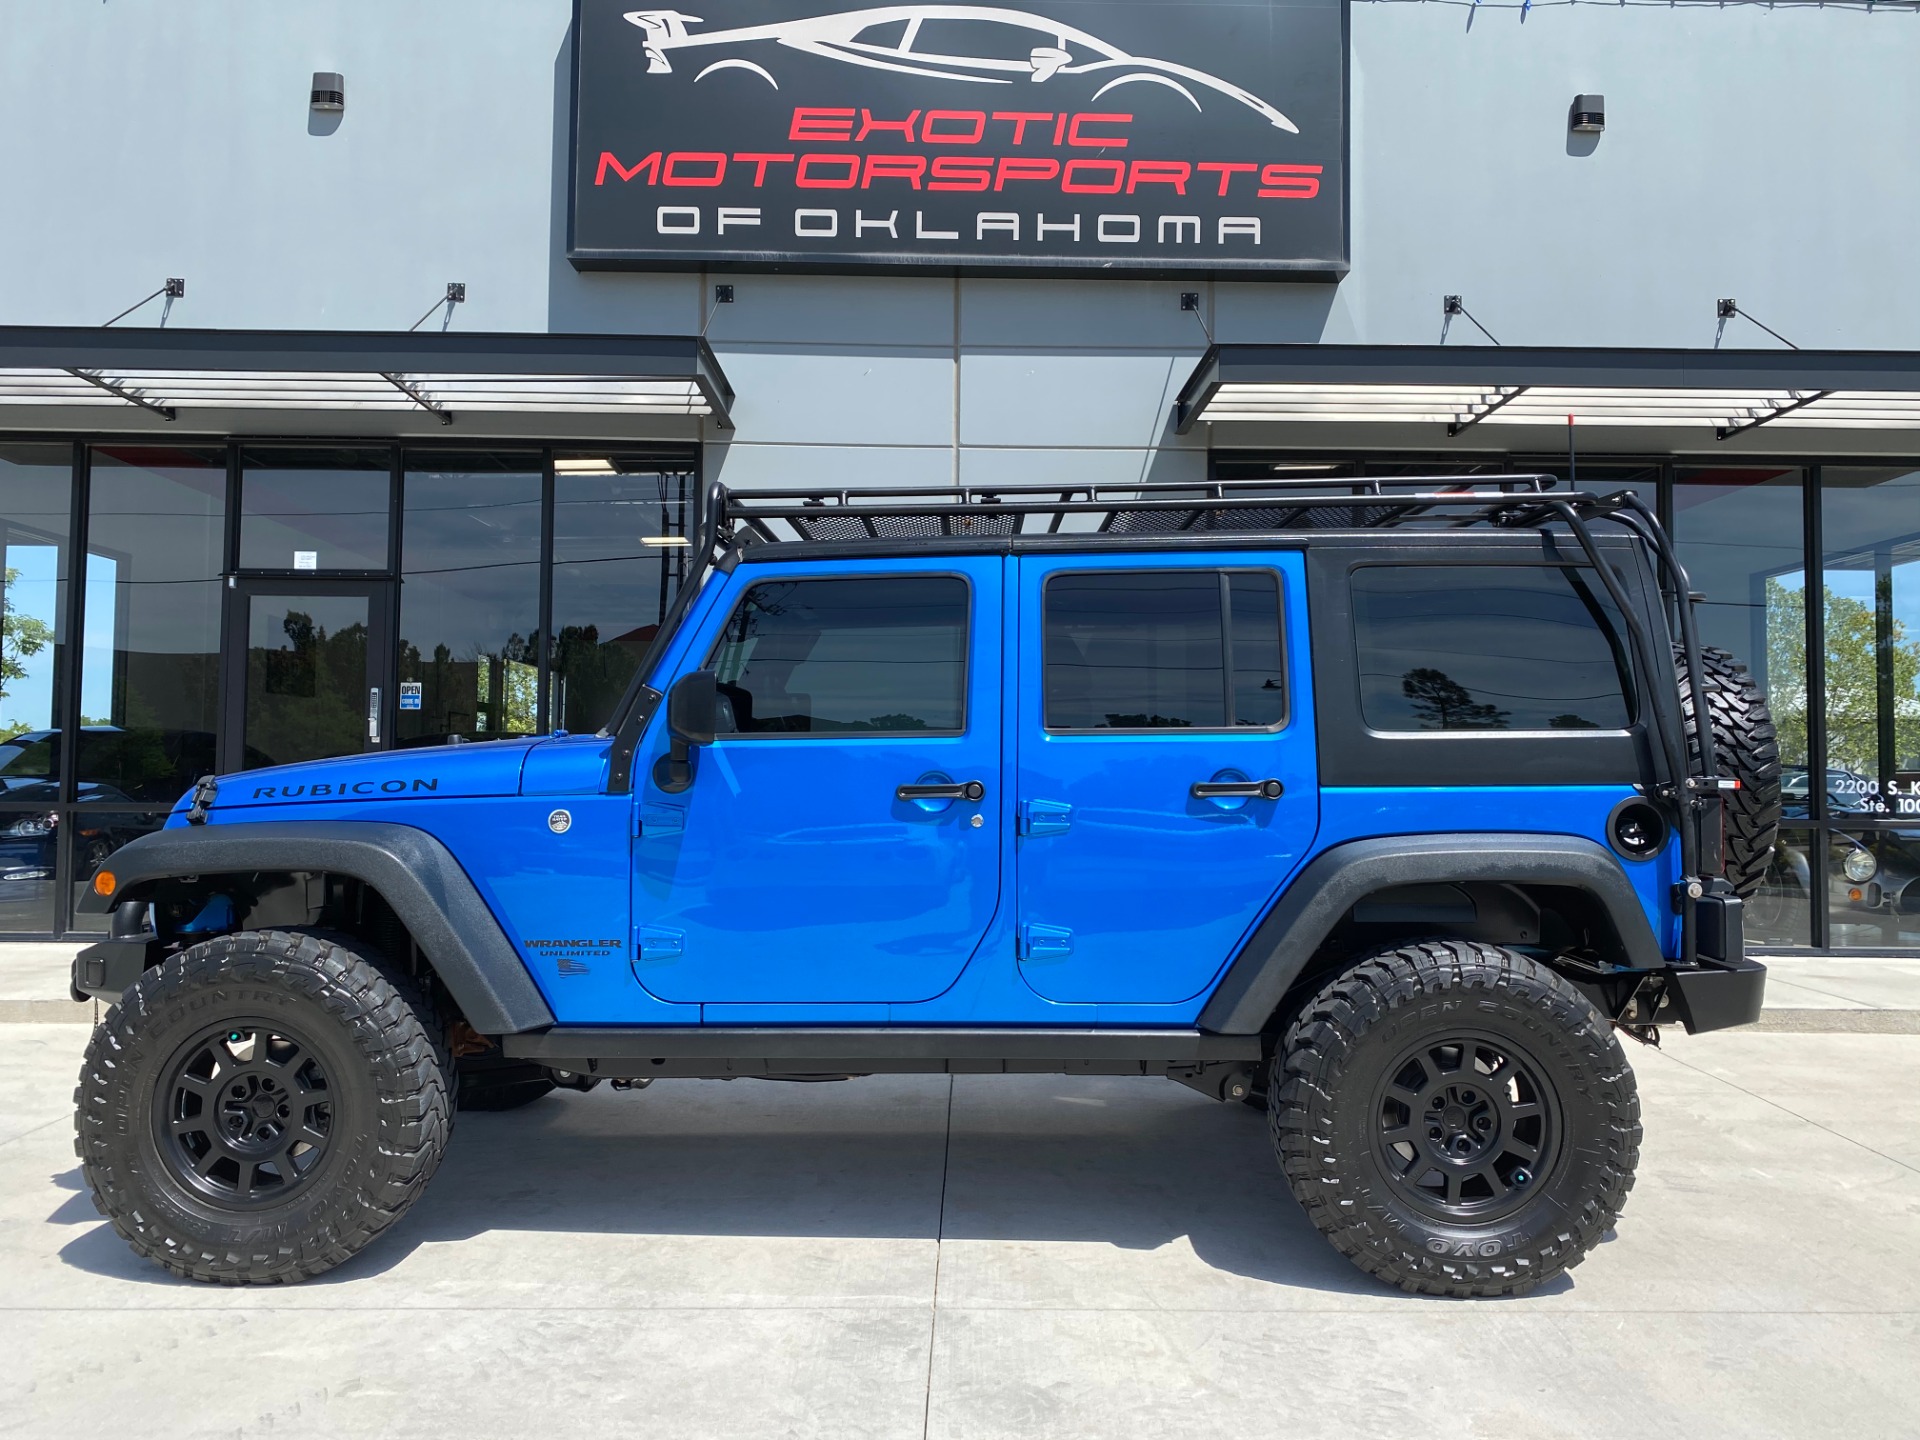 Used 16 Jeep Wrangler Unlimited Rubicon For Sale Sold Exotic Motorsports Of Oklahoma Stock C296